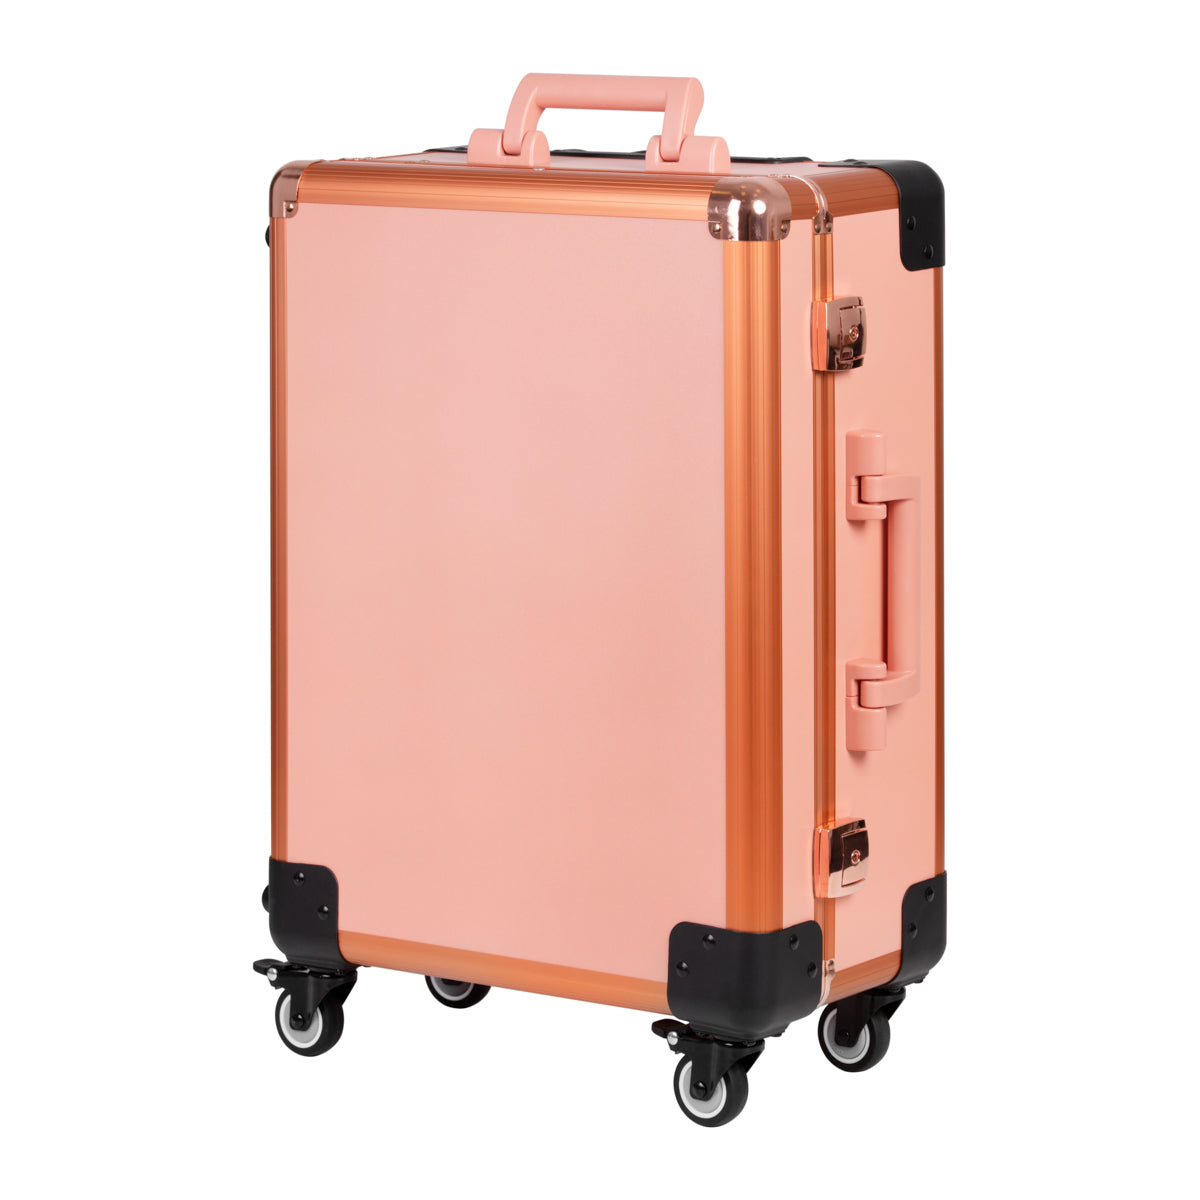 CASE PORTABLE STAND T-27 ROSE GOLD